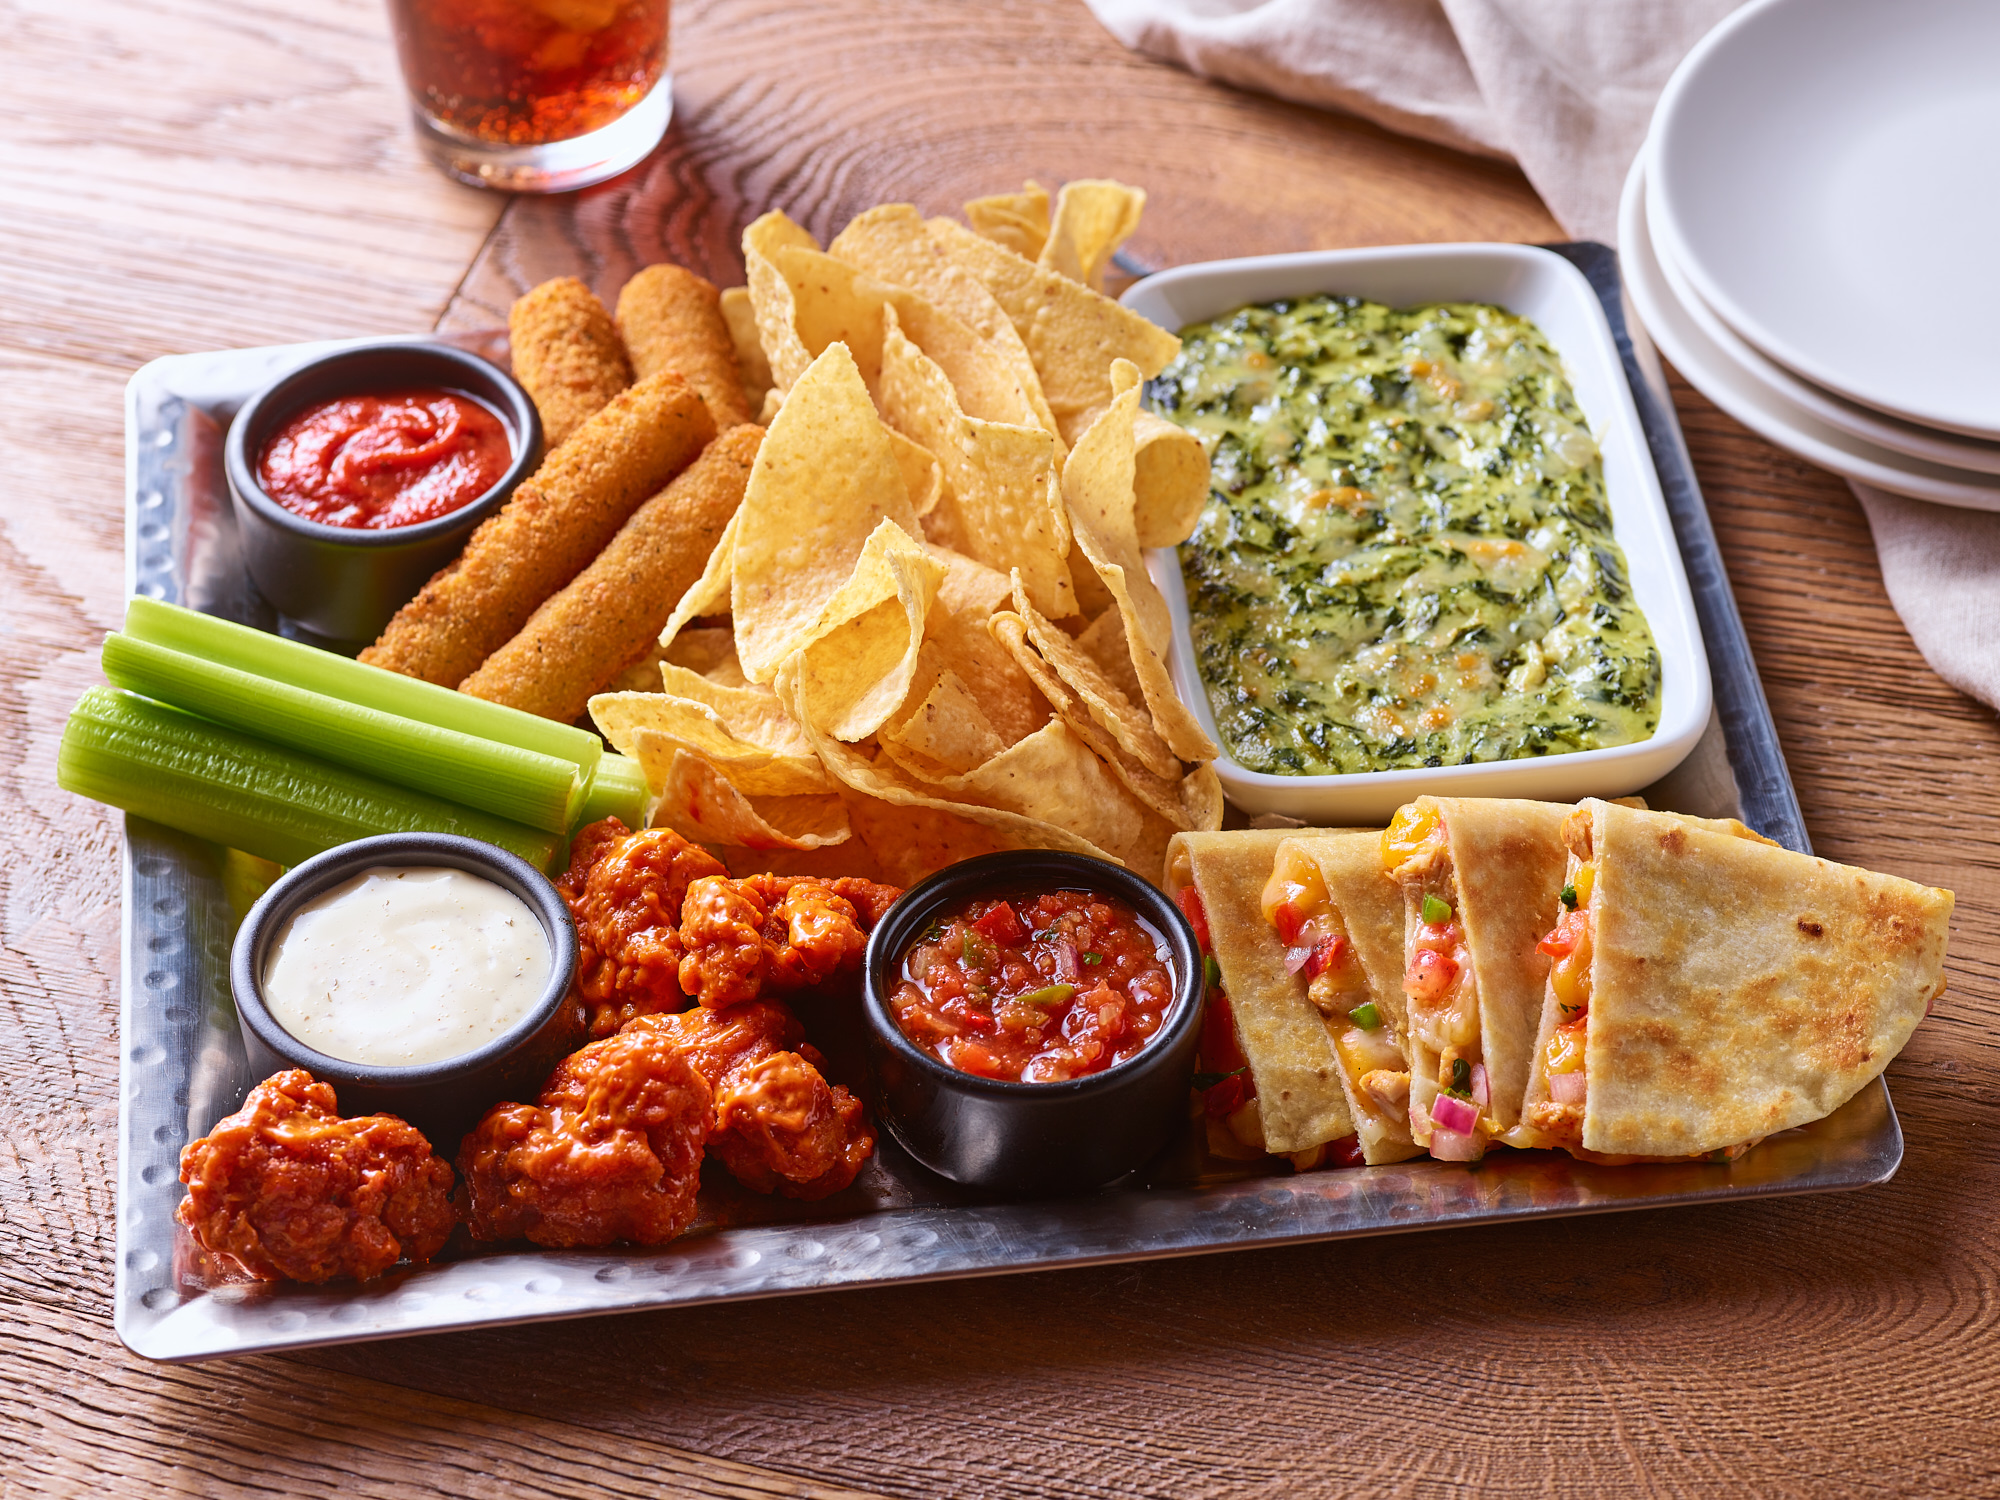 Classic Combo of dips and appetizers image captured by Los Angeles commercial food photographer Vinnie Finn | SternRep